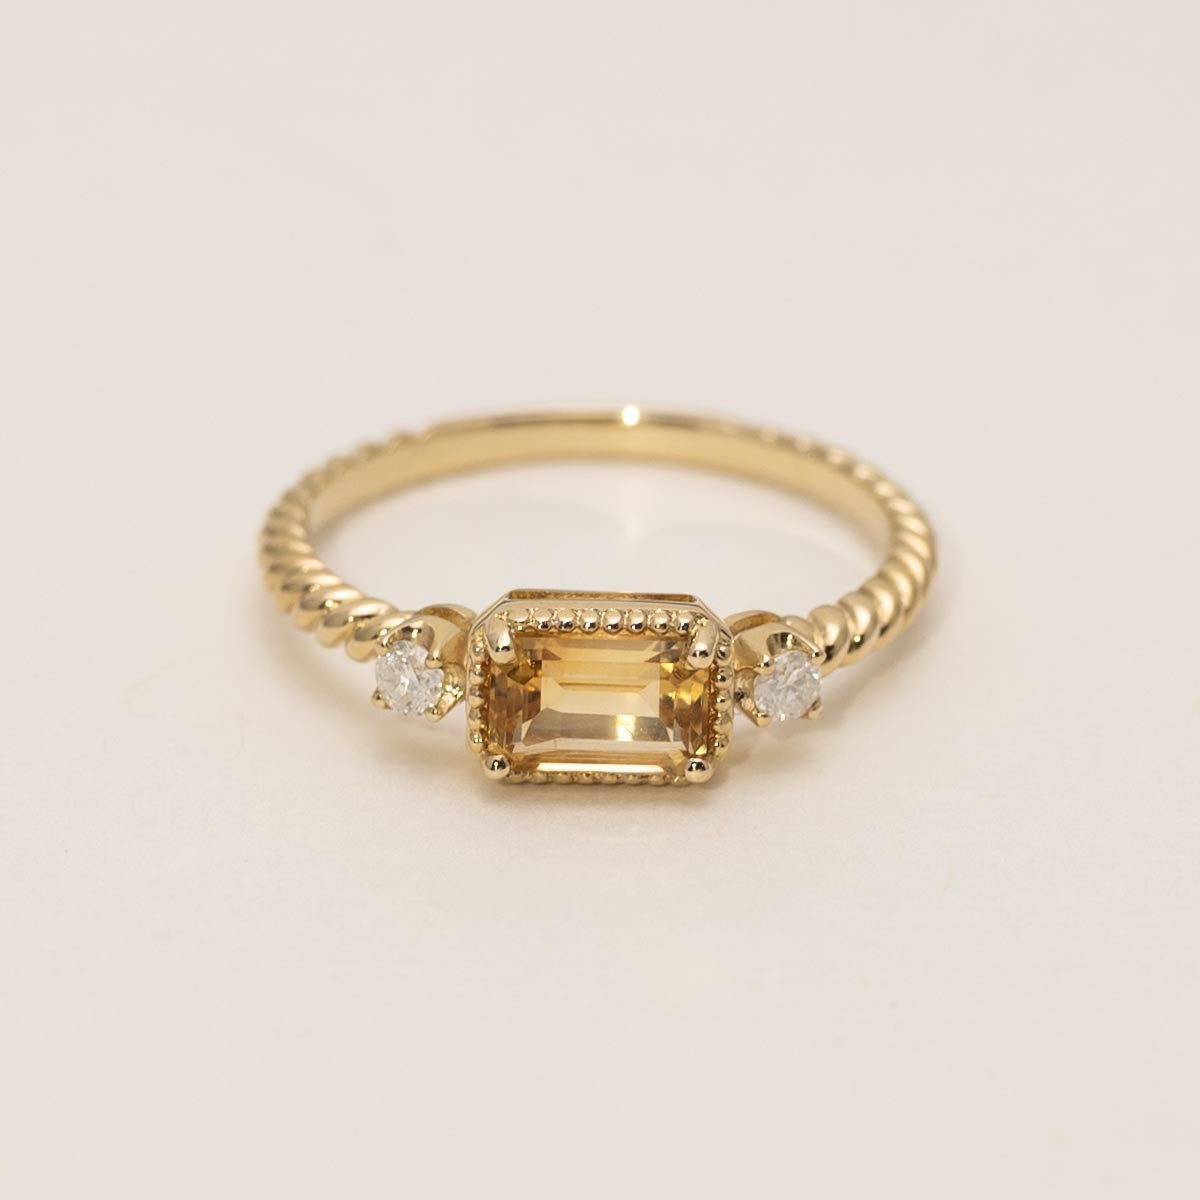 Emerald Cut Citrine Ring in 14kt Yellow Gold with Diamonds (1/10ct tw)